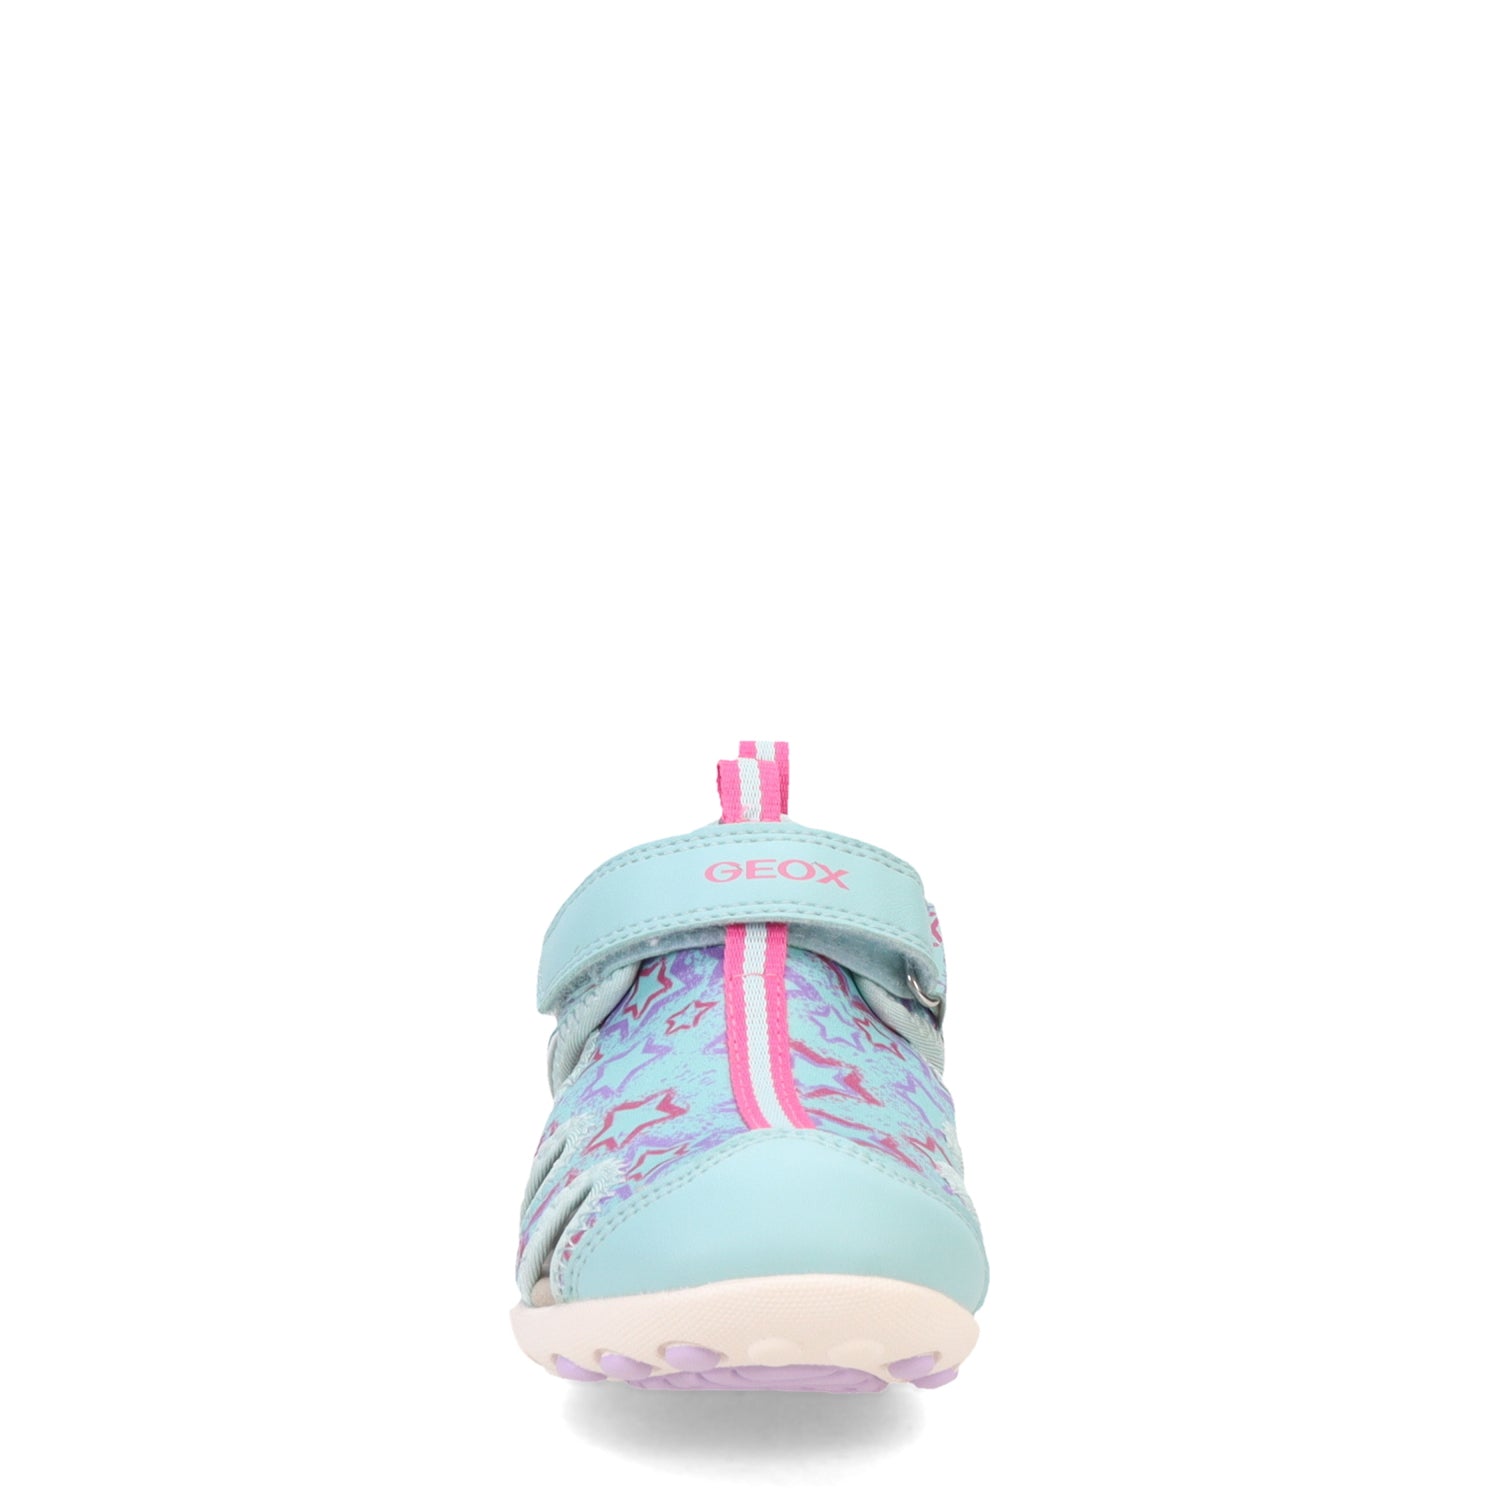 Peltz Shoes  Girl's Geox Whinberry Sandal – Toddler & Little Kid Aqua/Lilac J45GRC-0EE04-C4A8R